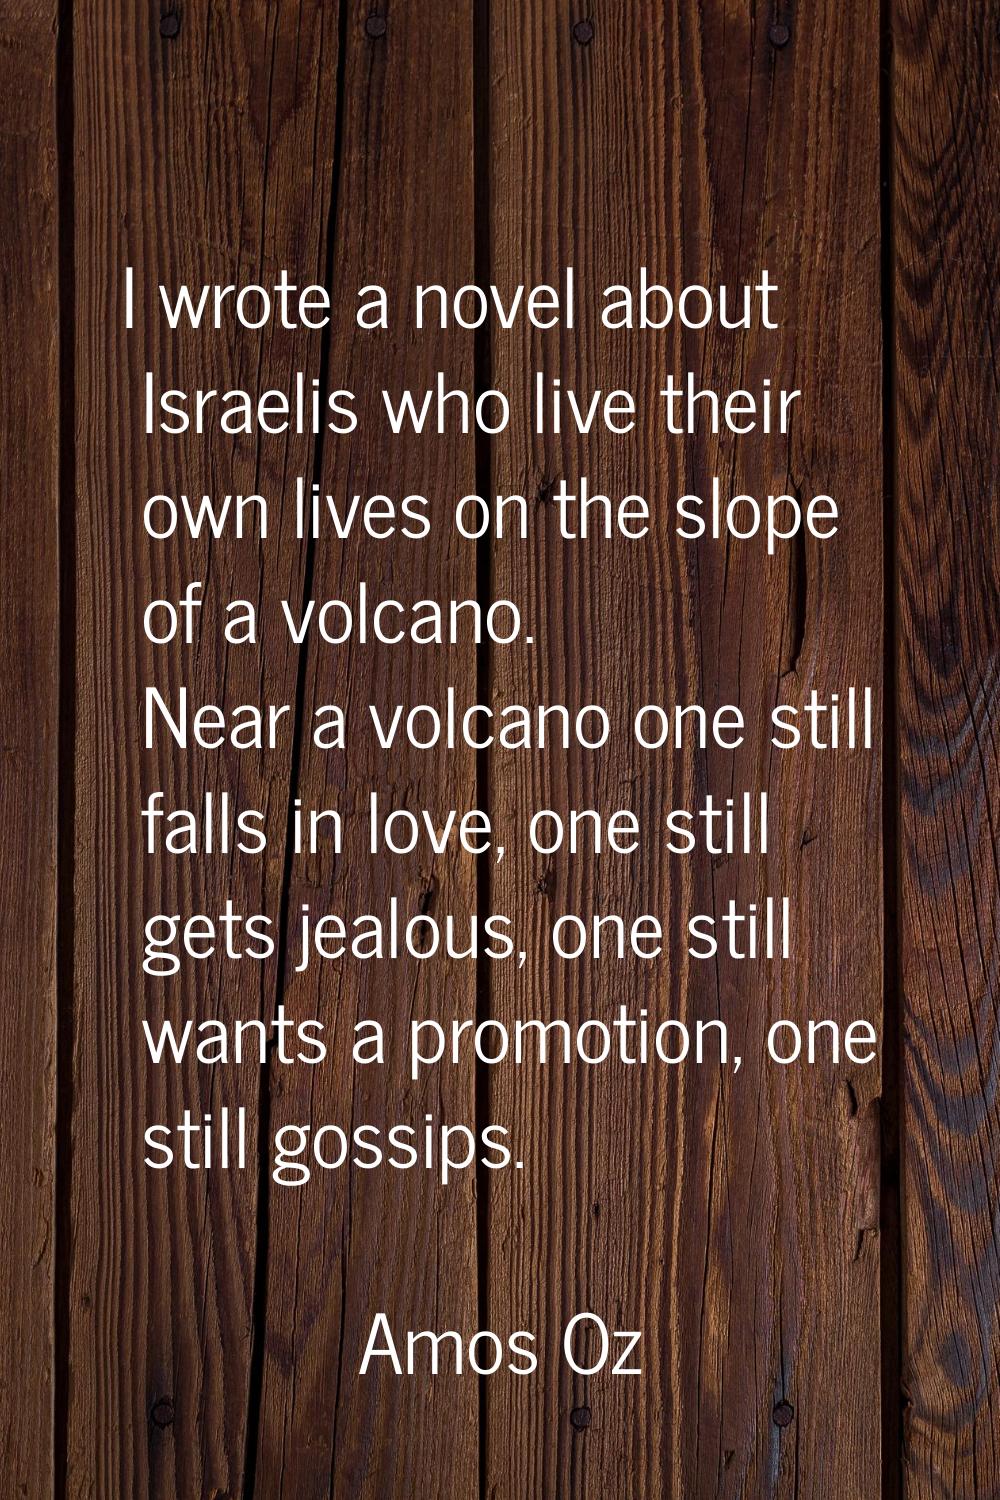 I wrote a novel about Israelis who live their own lives on the slope of a volcano. Near a volcano o